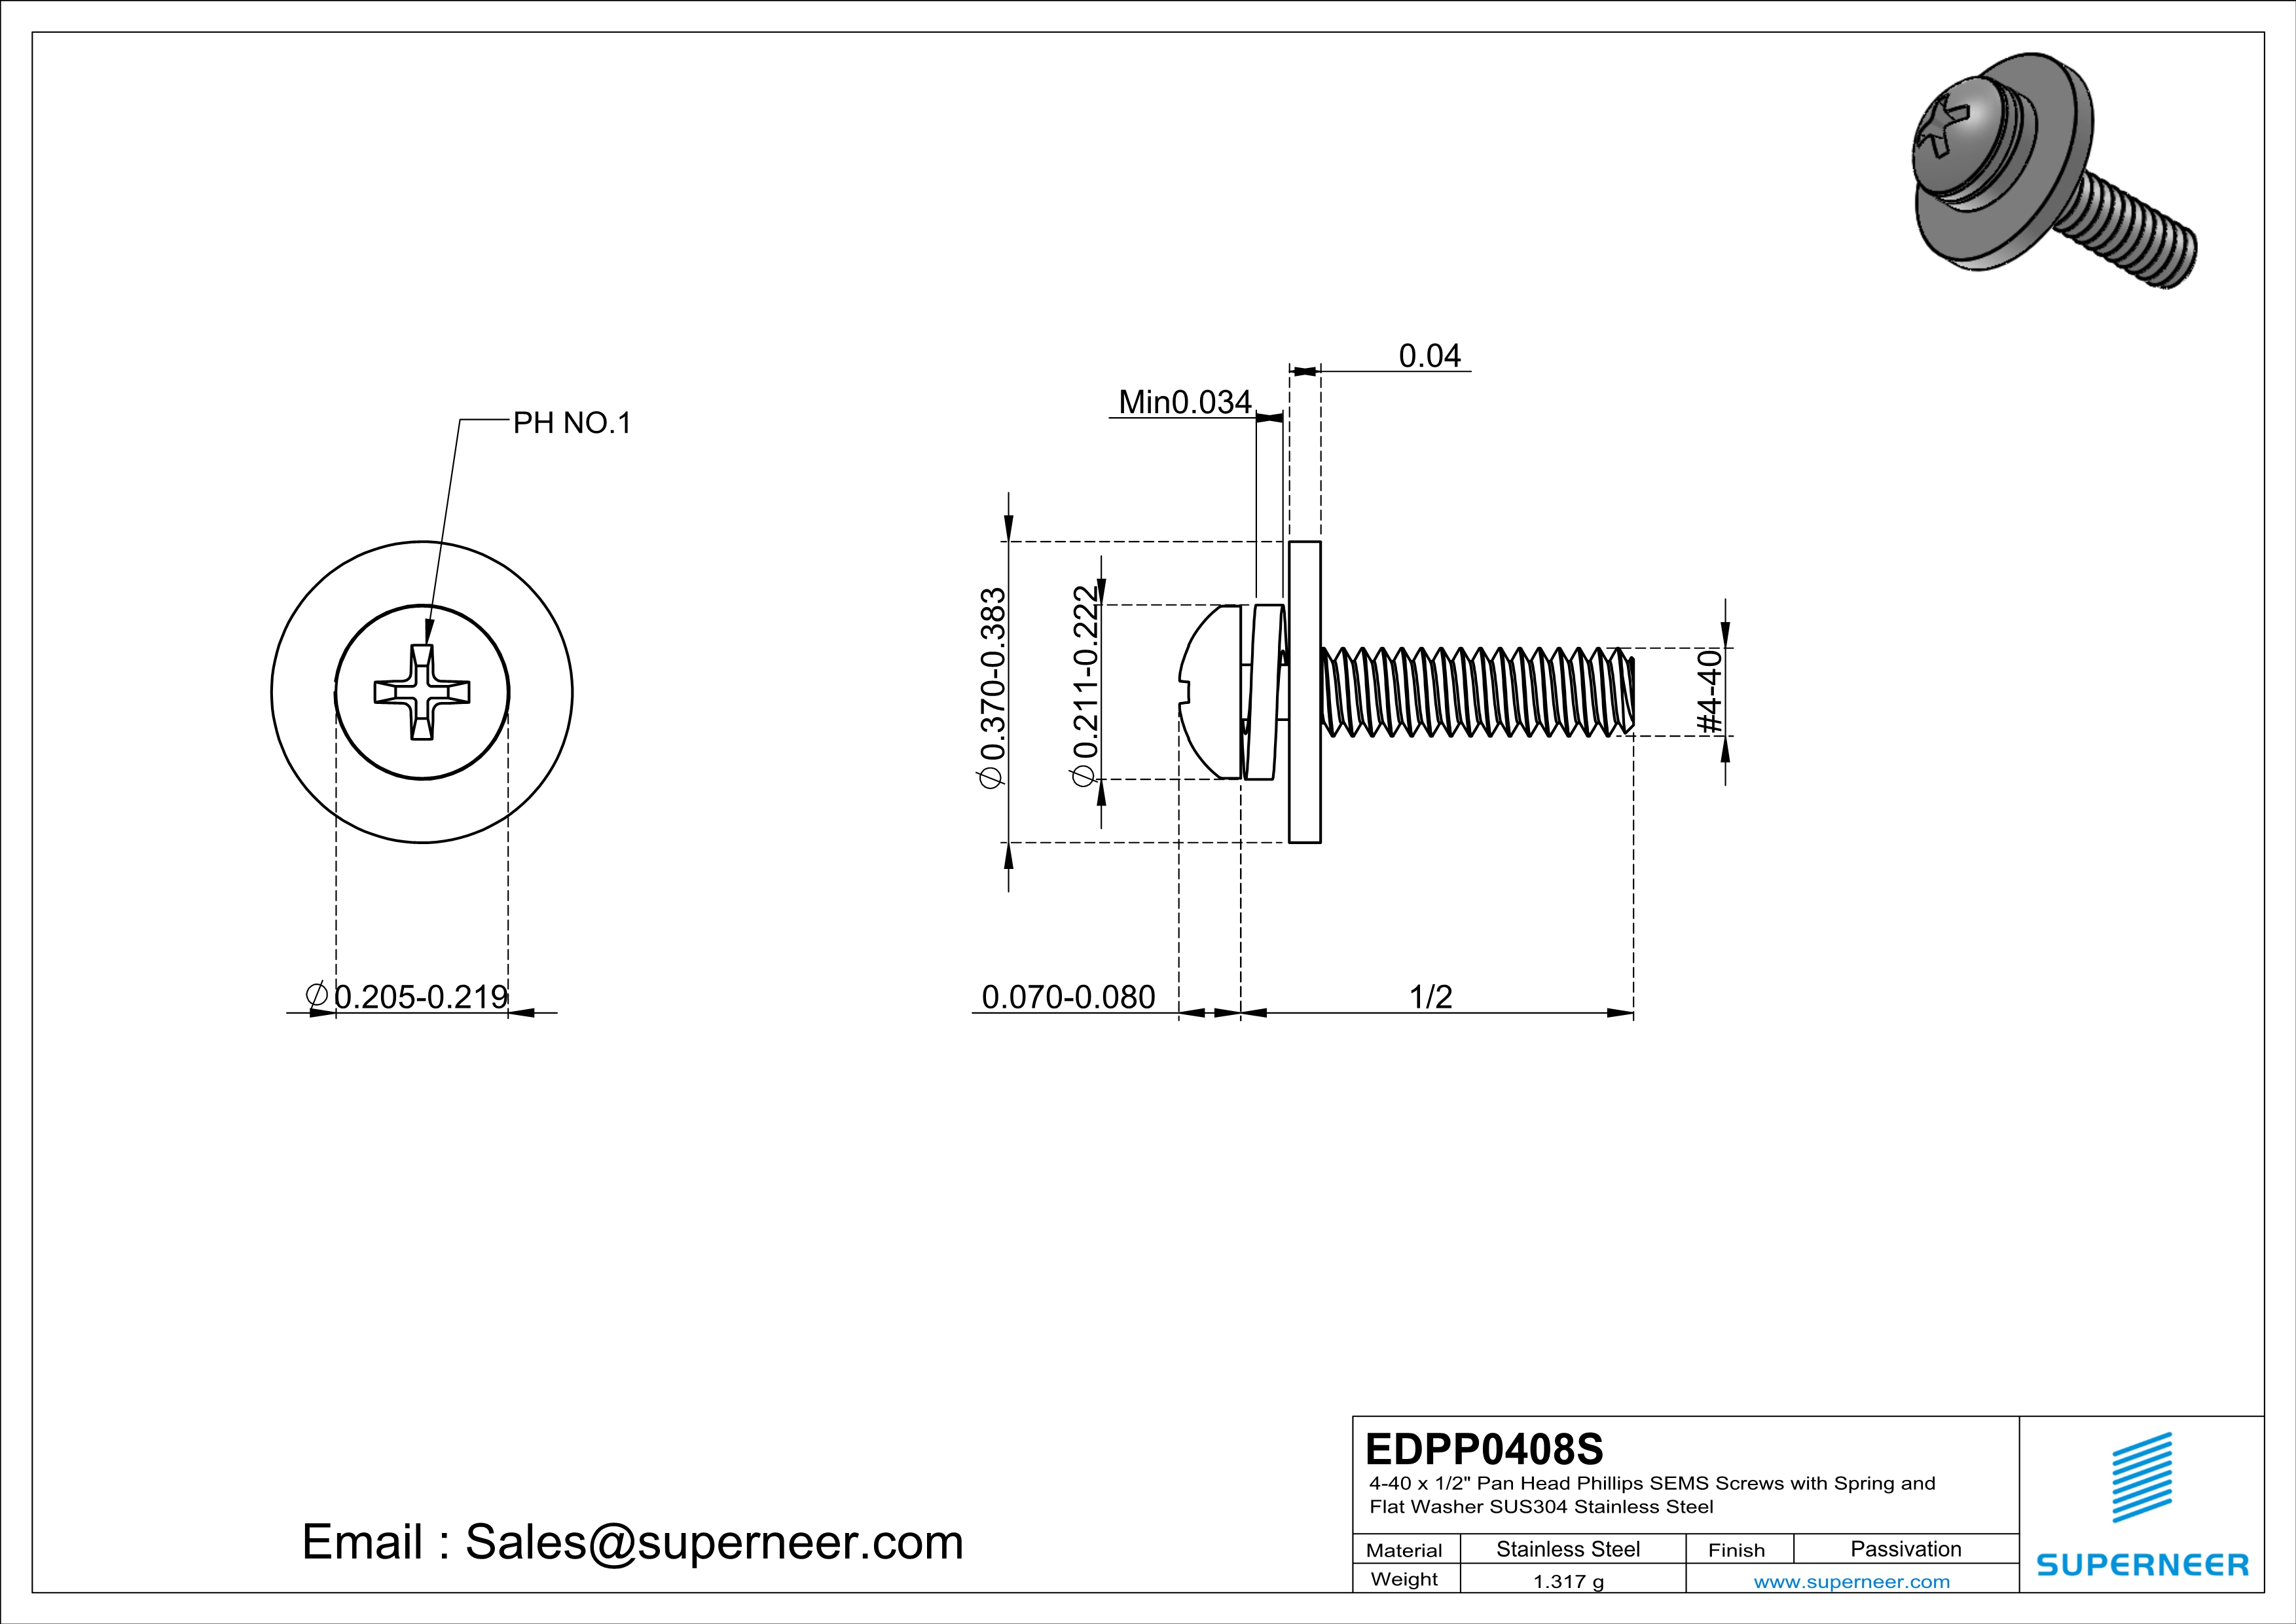 4-40 x 1/2" Pan Head Phillips SEMS Screws with Spring and Flat Washer SUS304 Stainless Steel Inox